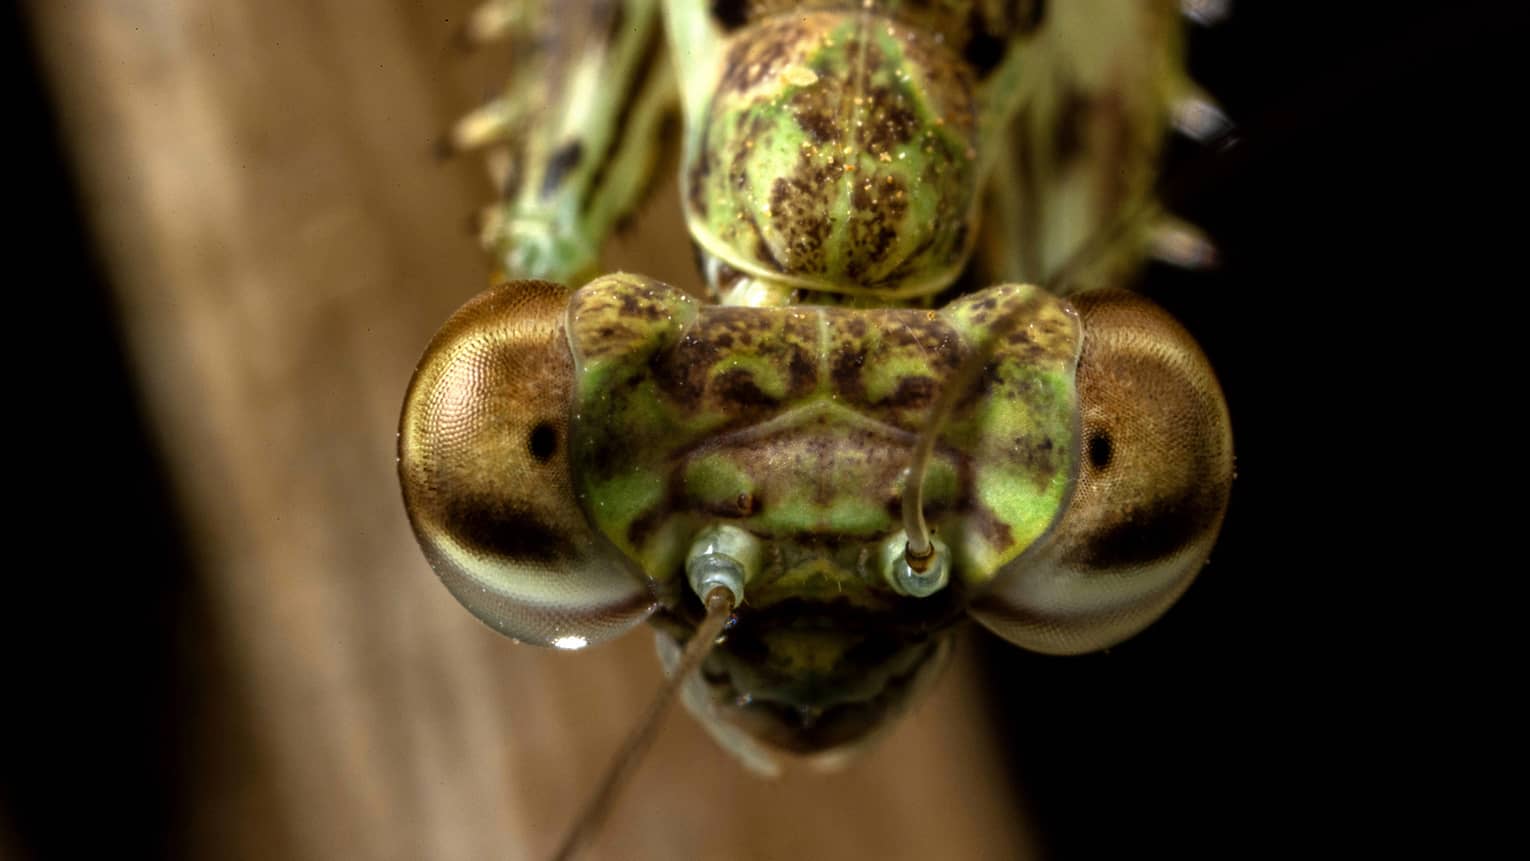 A close up shot of an interesting insect.